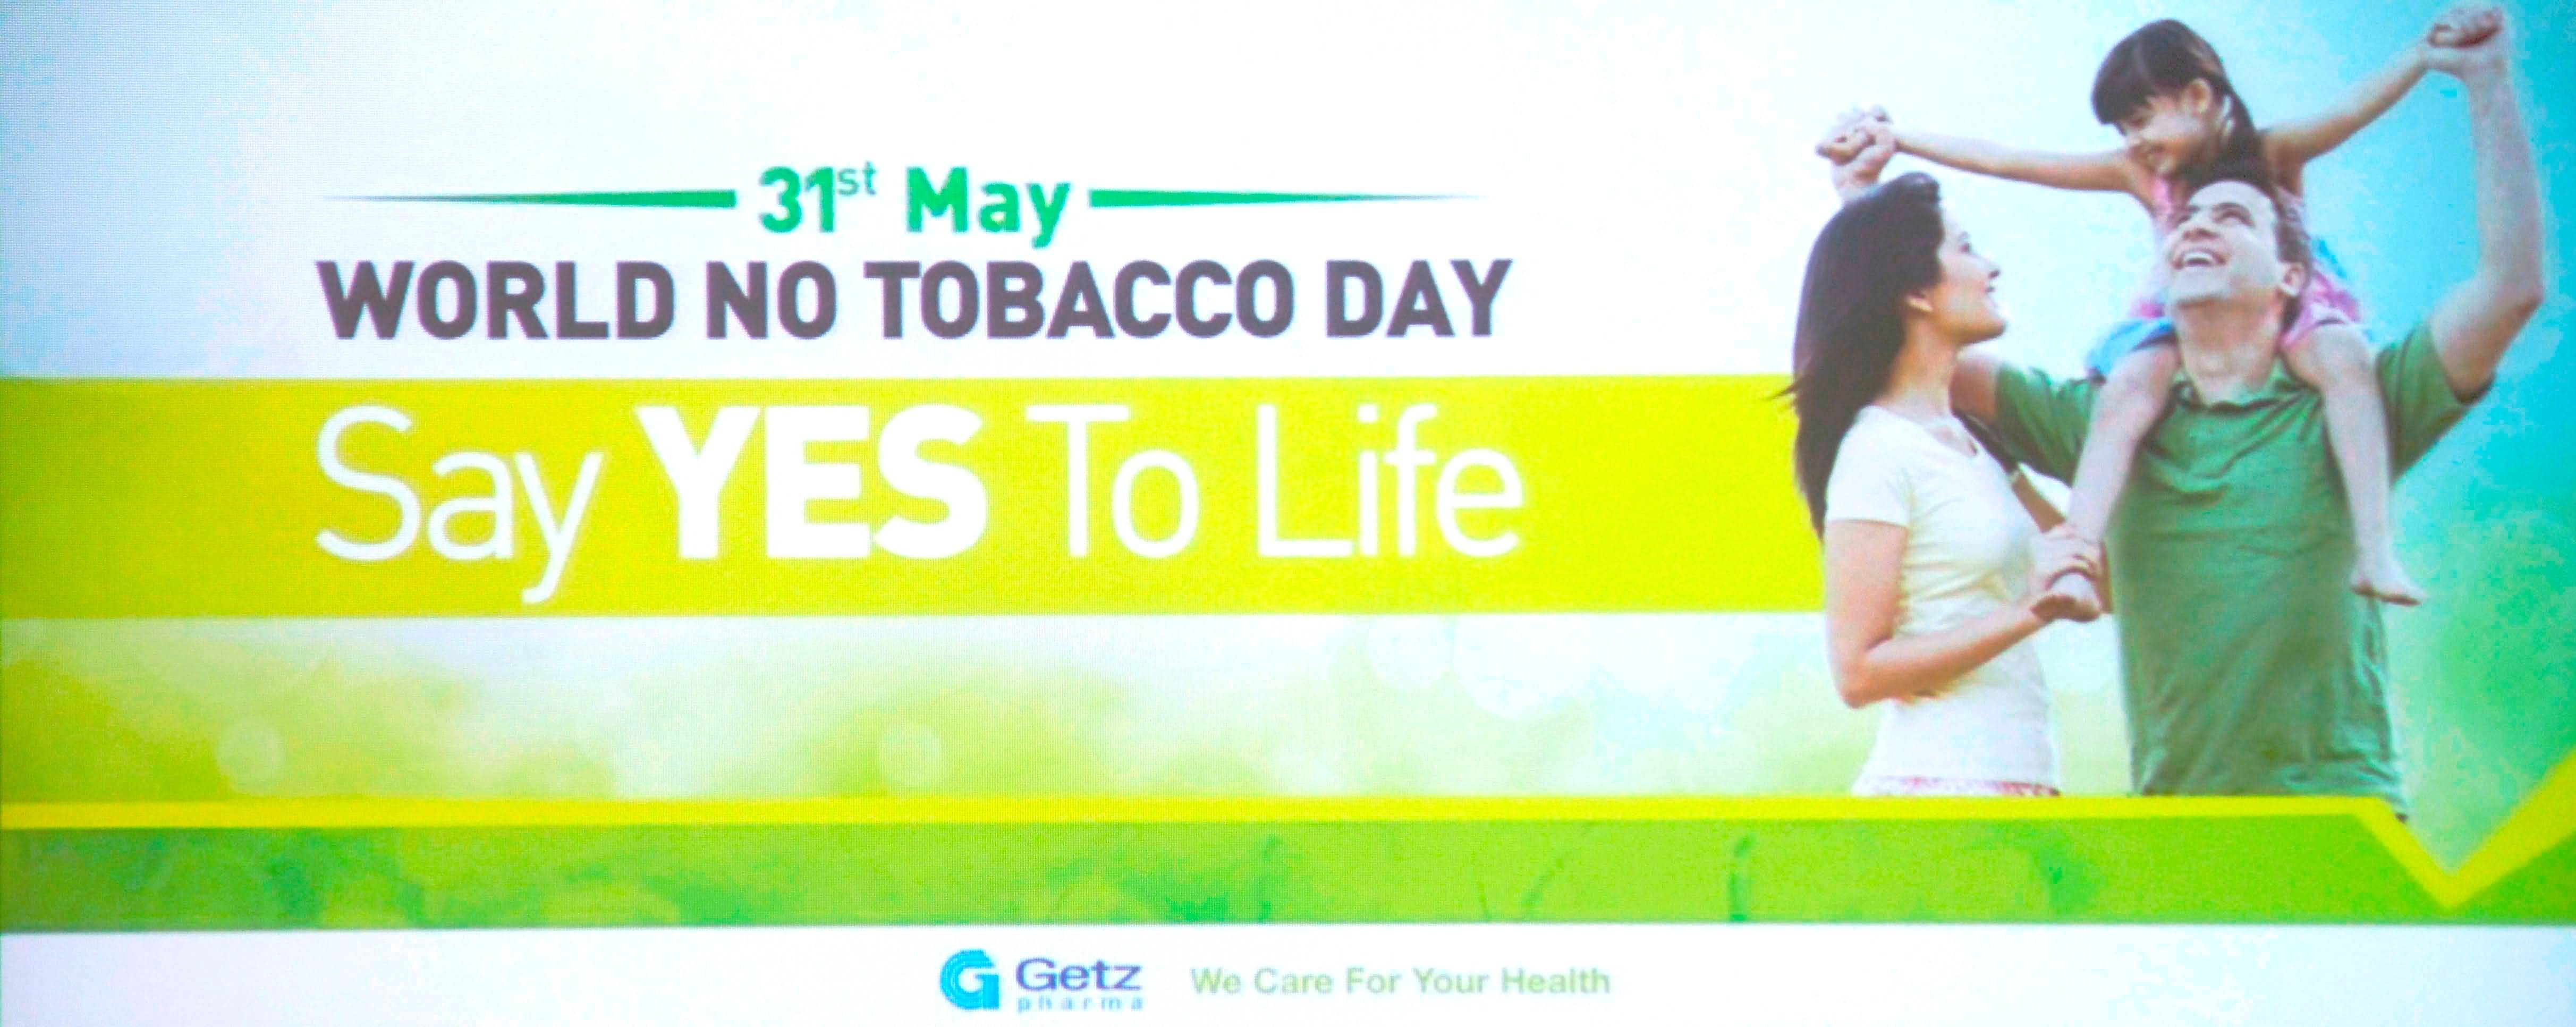 31st May World No Tobacco Day Say Yes To Life